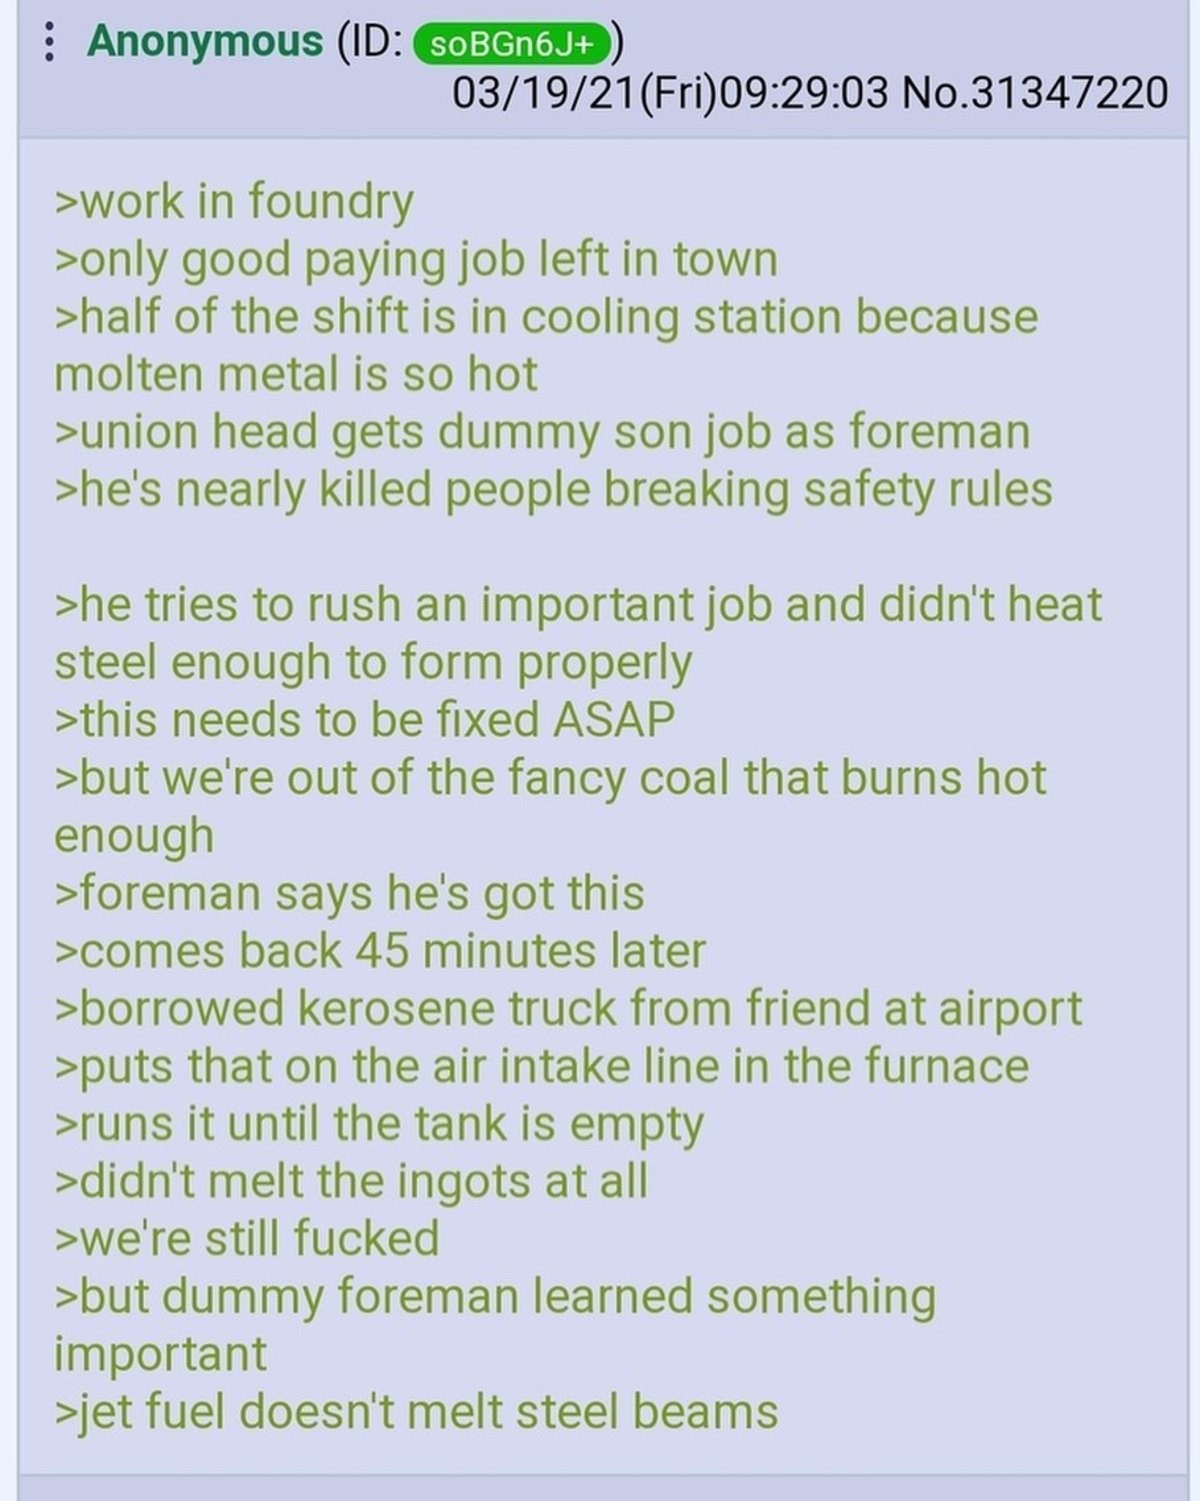 Anon's idiot boss learns a lesson. .. Unions don't work